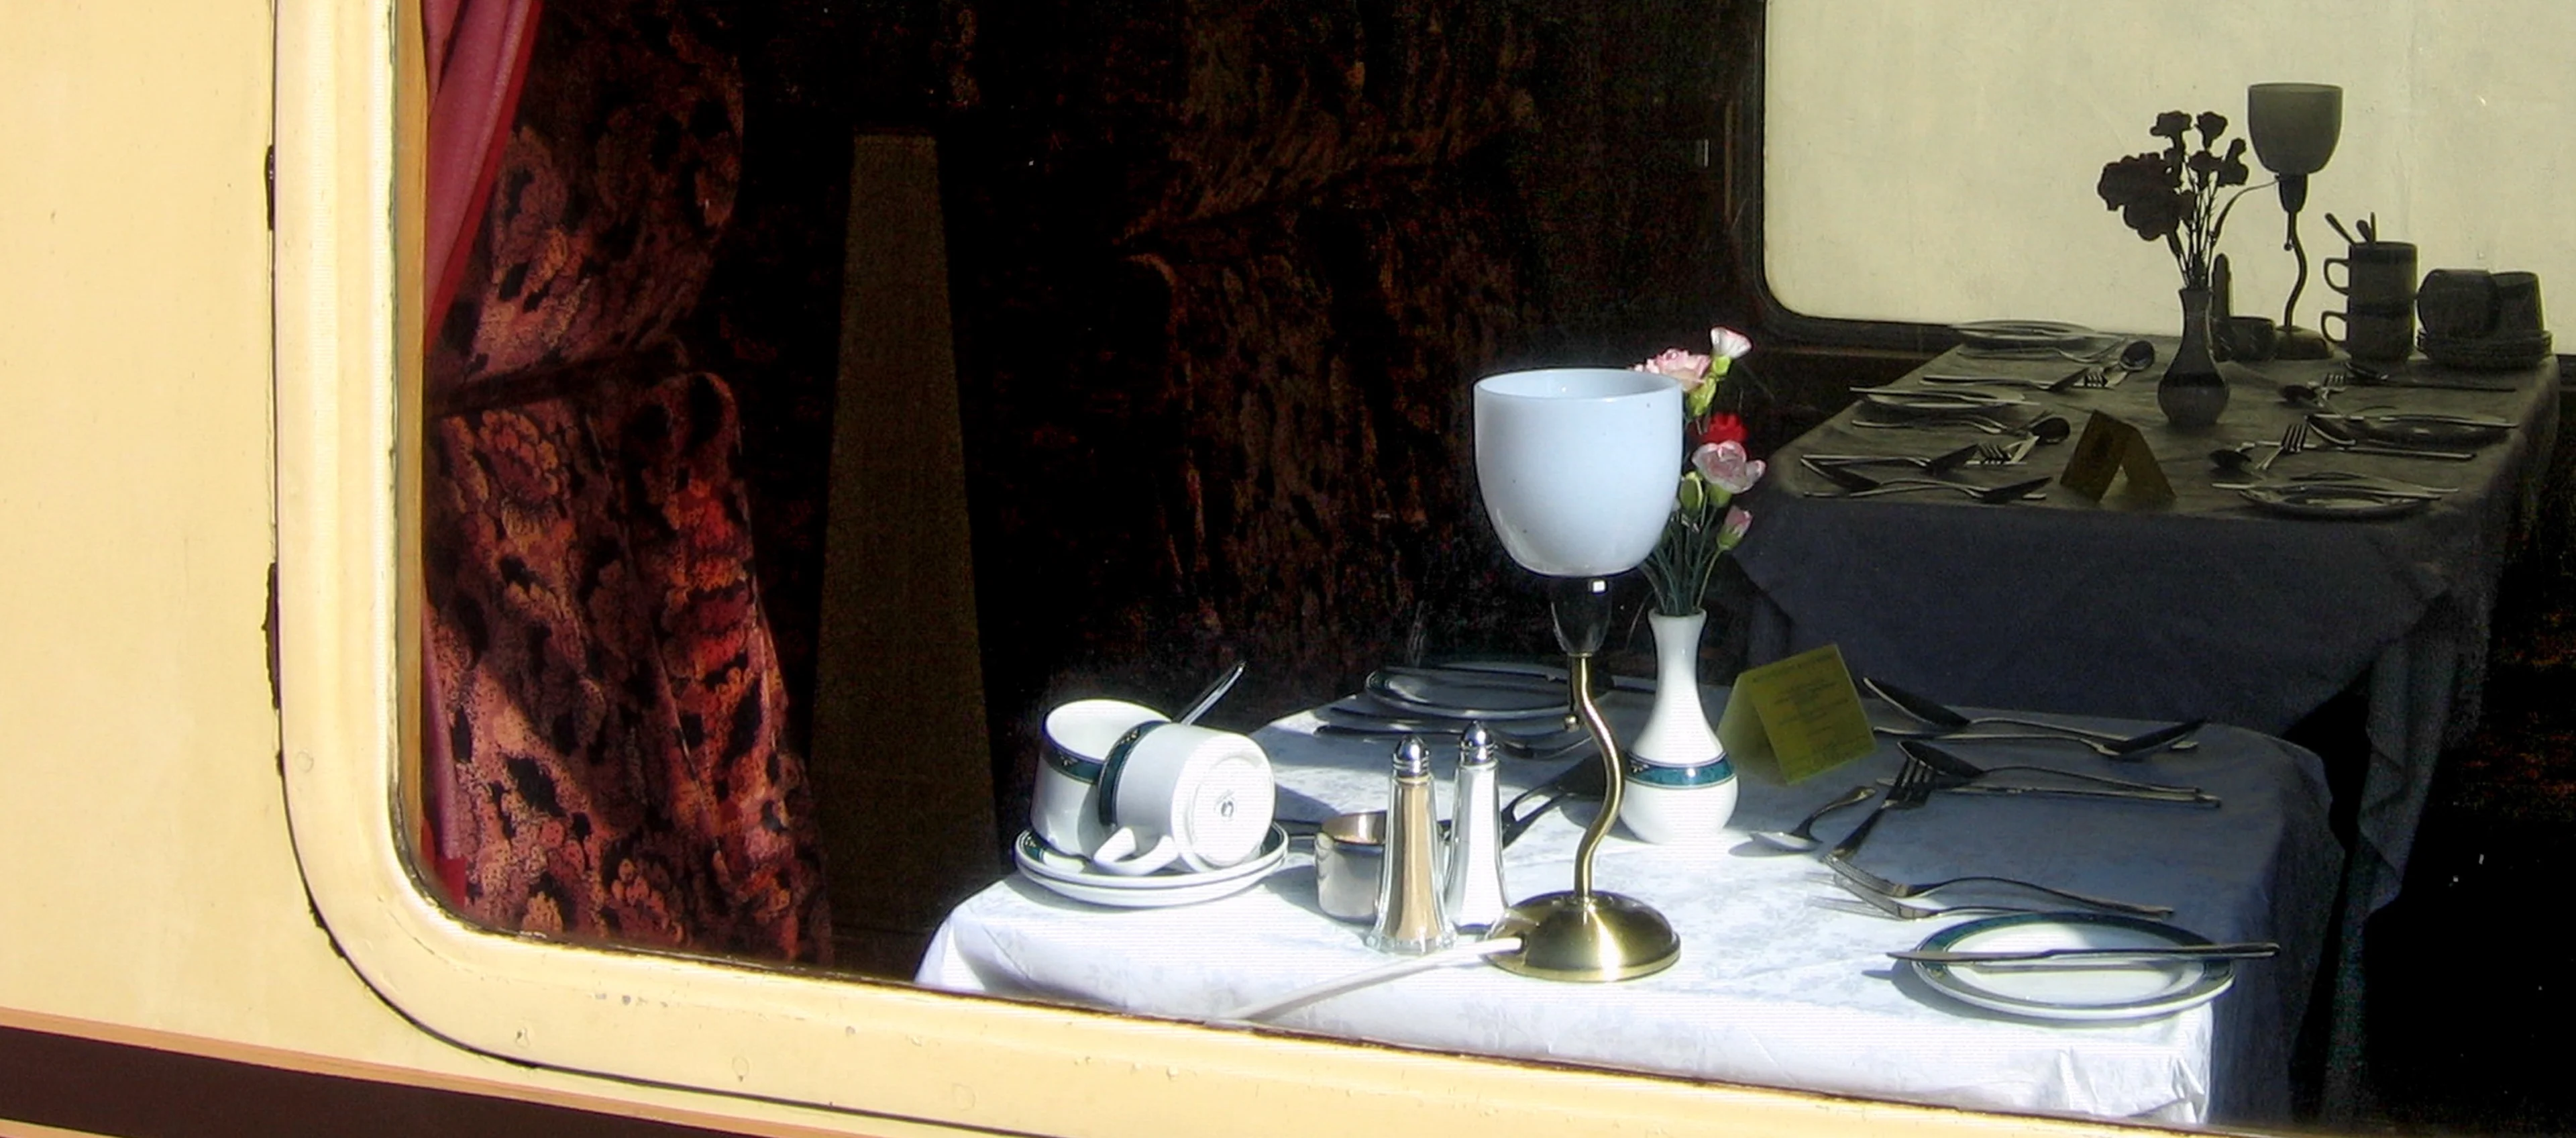 Looking into a train Pullman dining car from outside, the table is laid with a white tablecloth and crockery and cutlery, with flowers in a vase